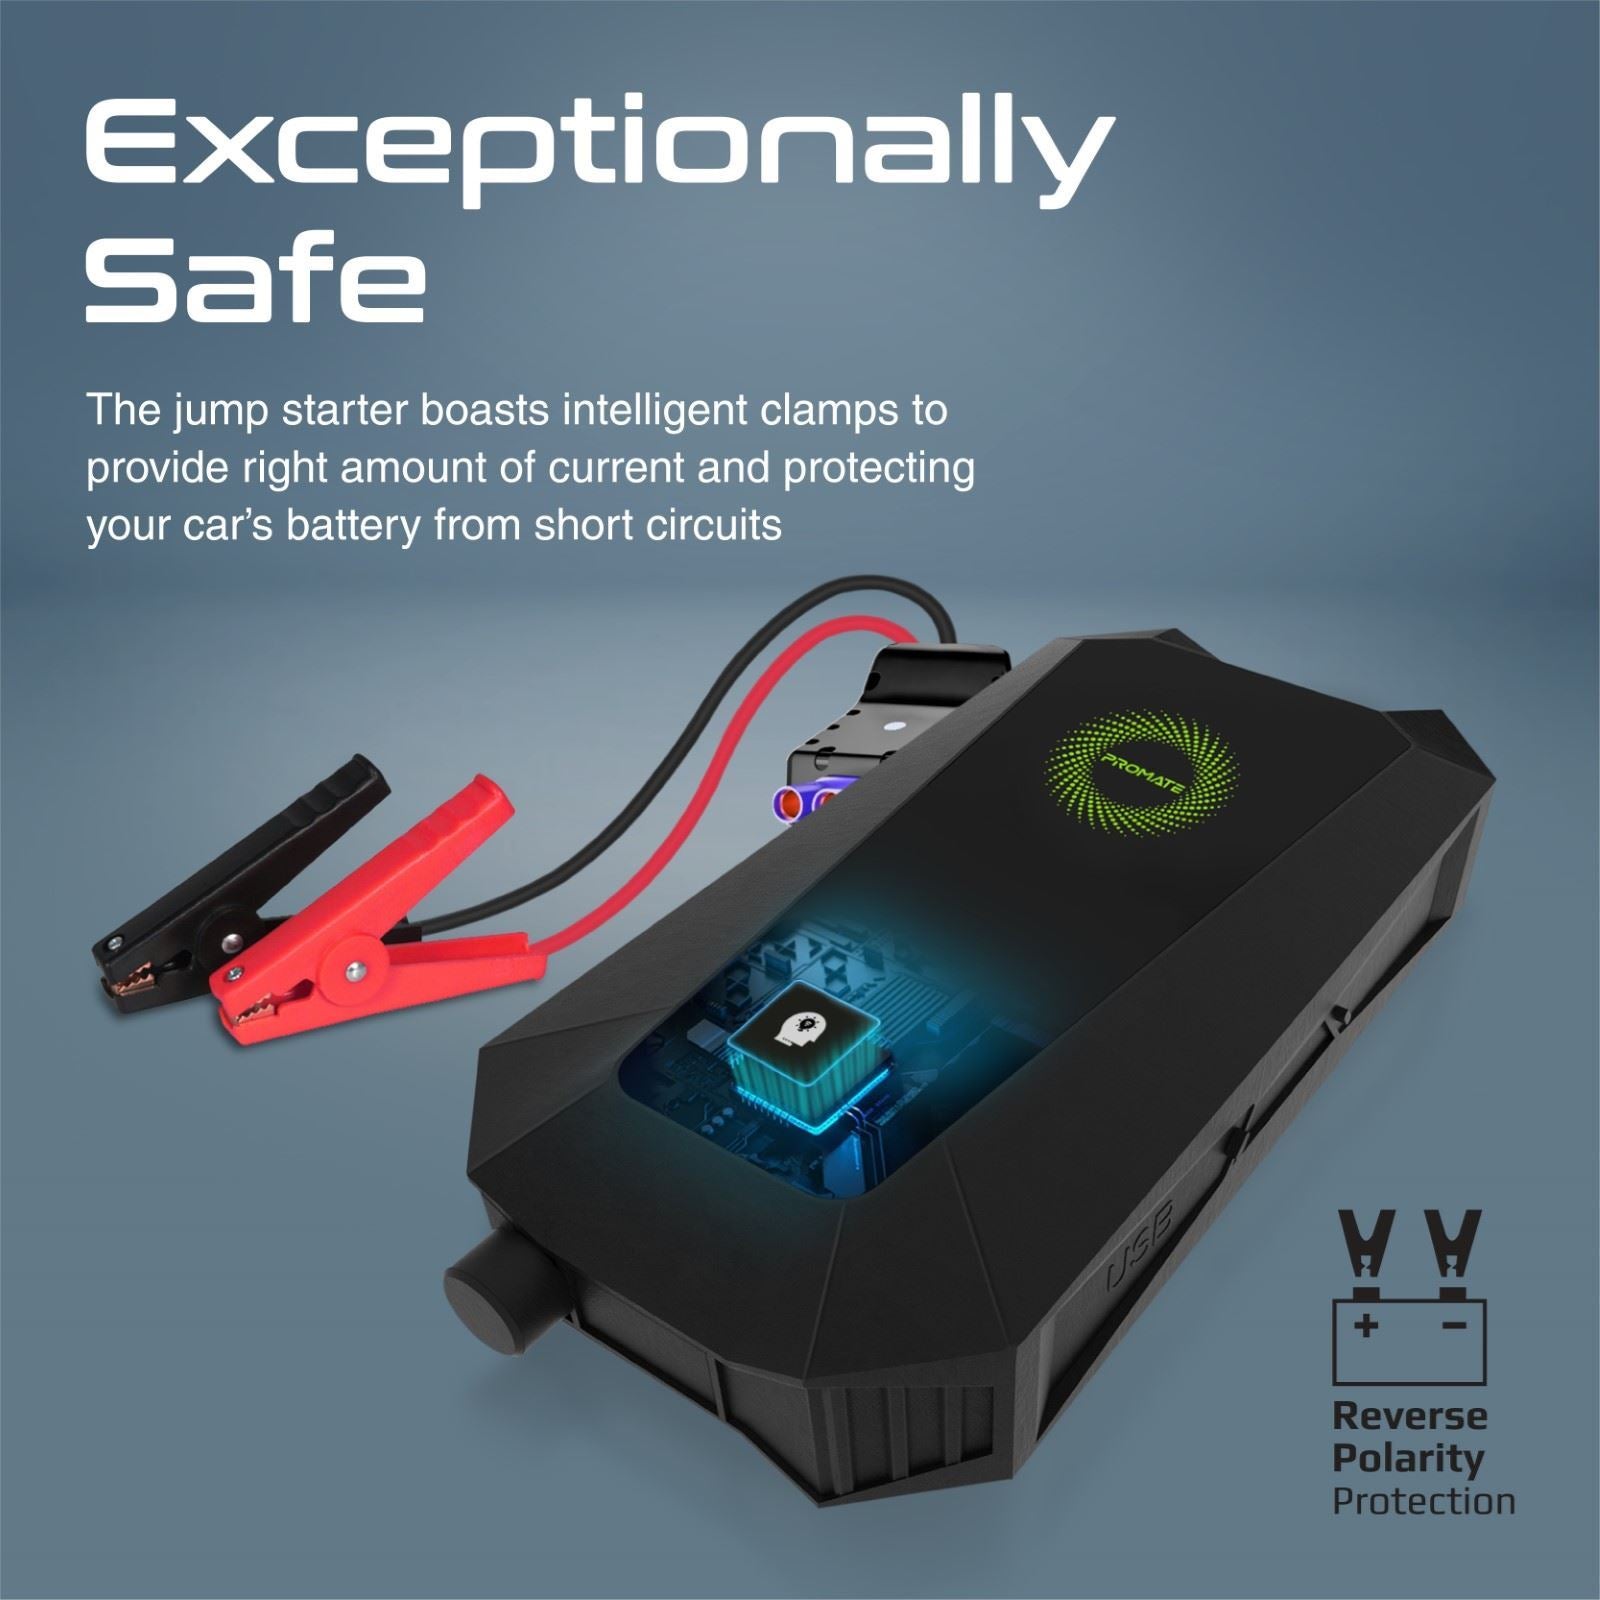 PROMATE_19000mAh_Jump_Starter_Power_Bank._1500A/12V_Peak_Current._Dual_Port,_LED_Flashlight,_Wireless_Charger_and_Safety_Hammer._Smart_Clamps_for_Short_Circuit_Protection_LED_Indicators. 197